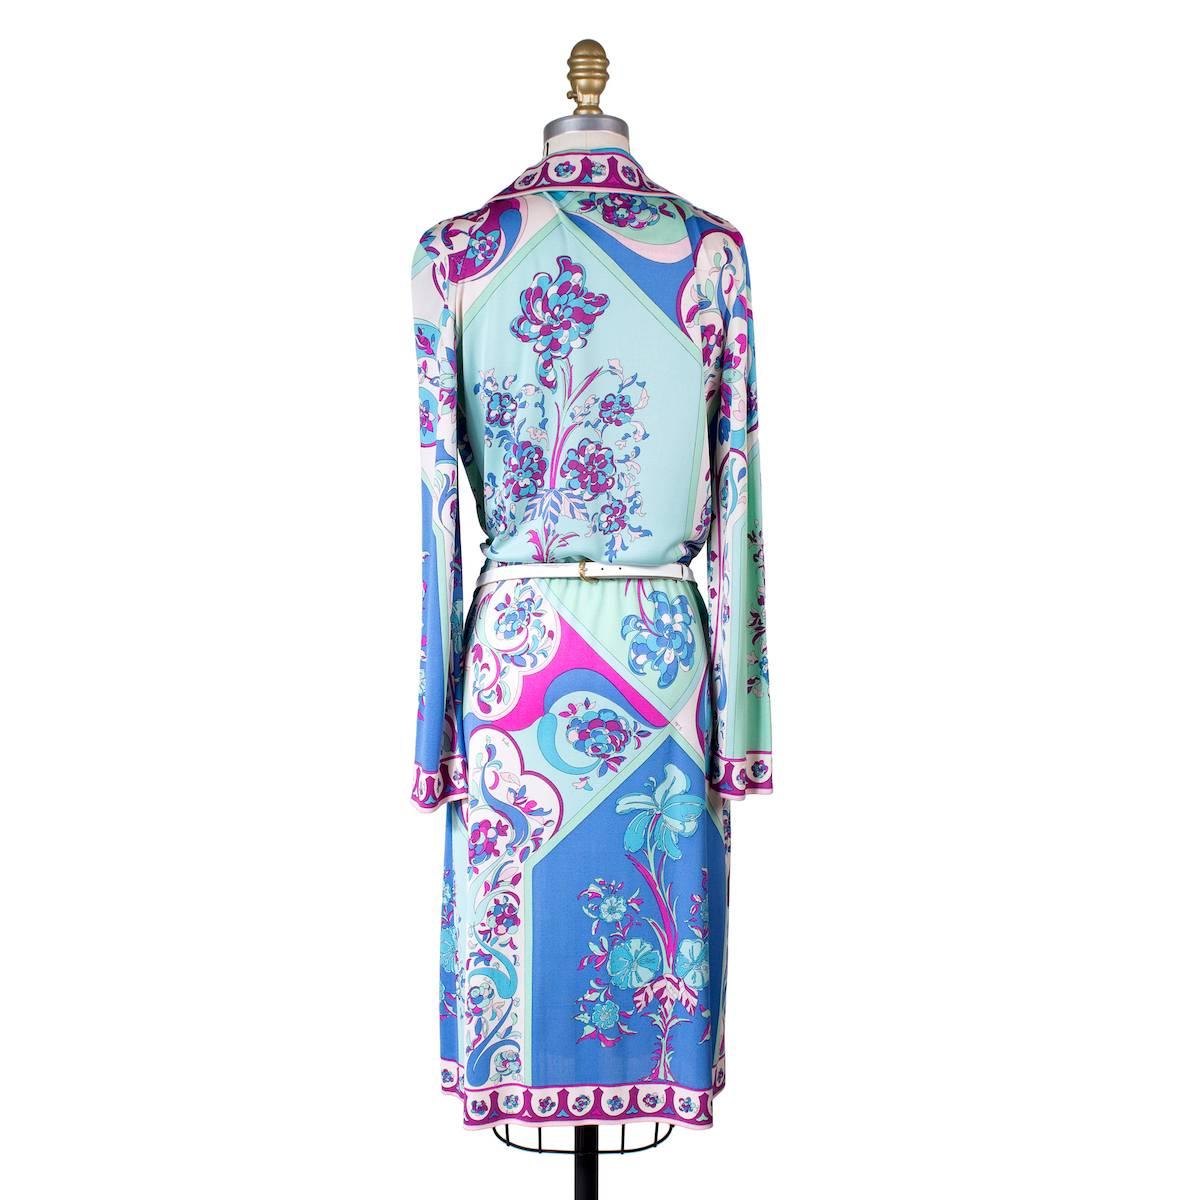 This is a vintage Pucci dress circa 1970s.  It features a signature Pucci print and includes a matching white leather belt to cinch the waist and button closures in front.